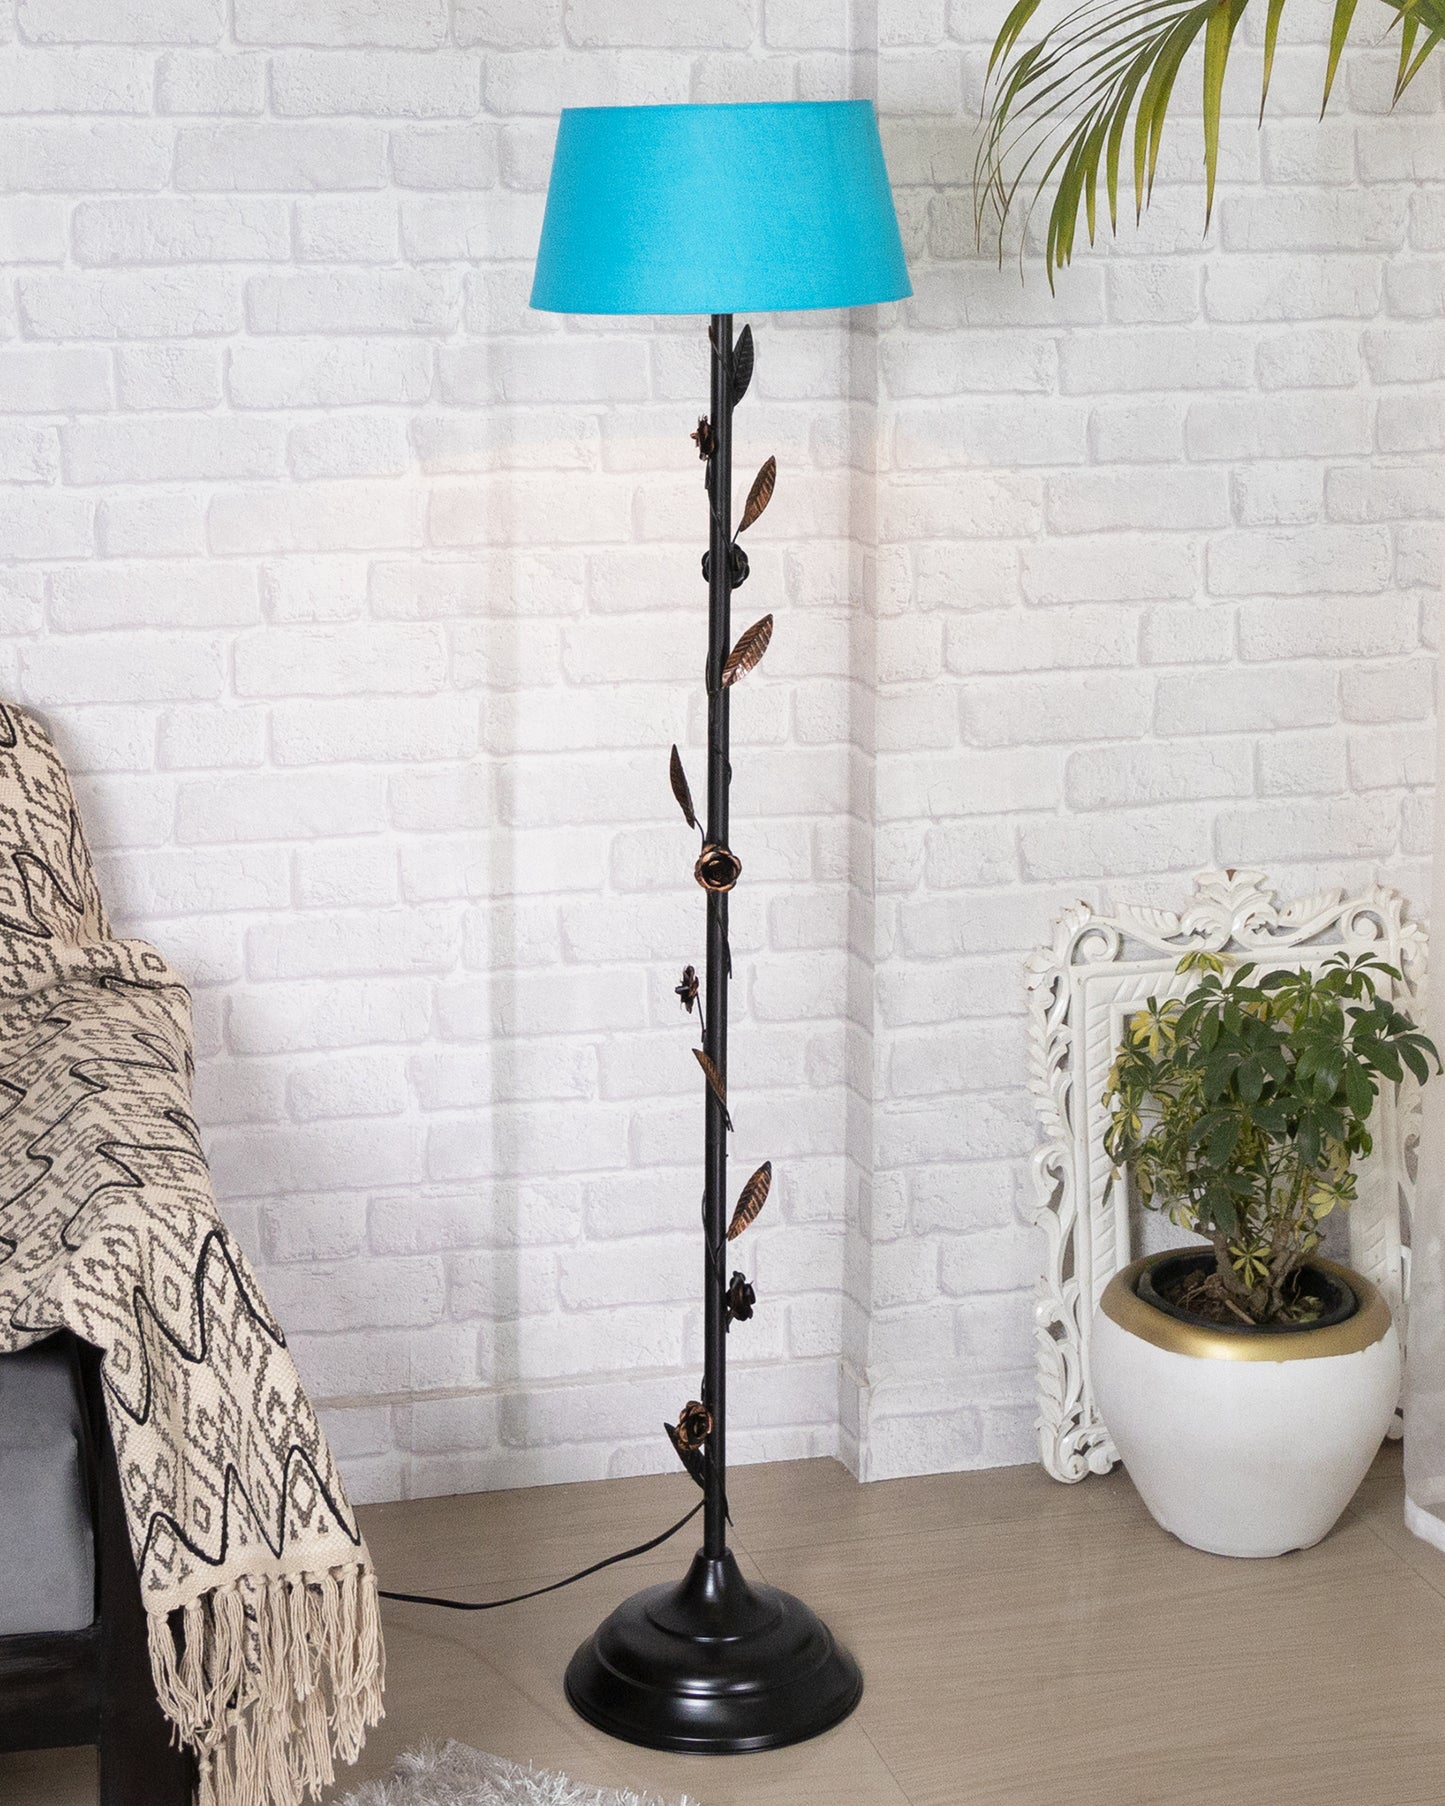 Contemporary Metal Floor Lamp,Contemporary Minimalist Standing Floor Light with Iron Legs,E27 Lamp Base,Modern Design Standing Light for Living Room,Study Room and Bedroom, Floral